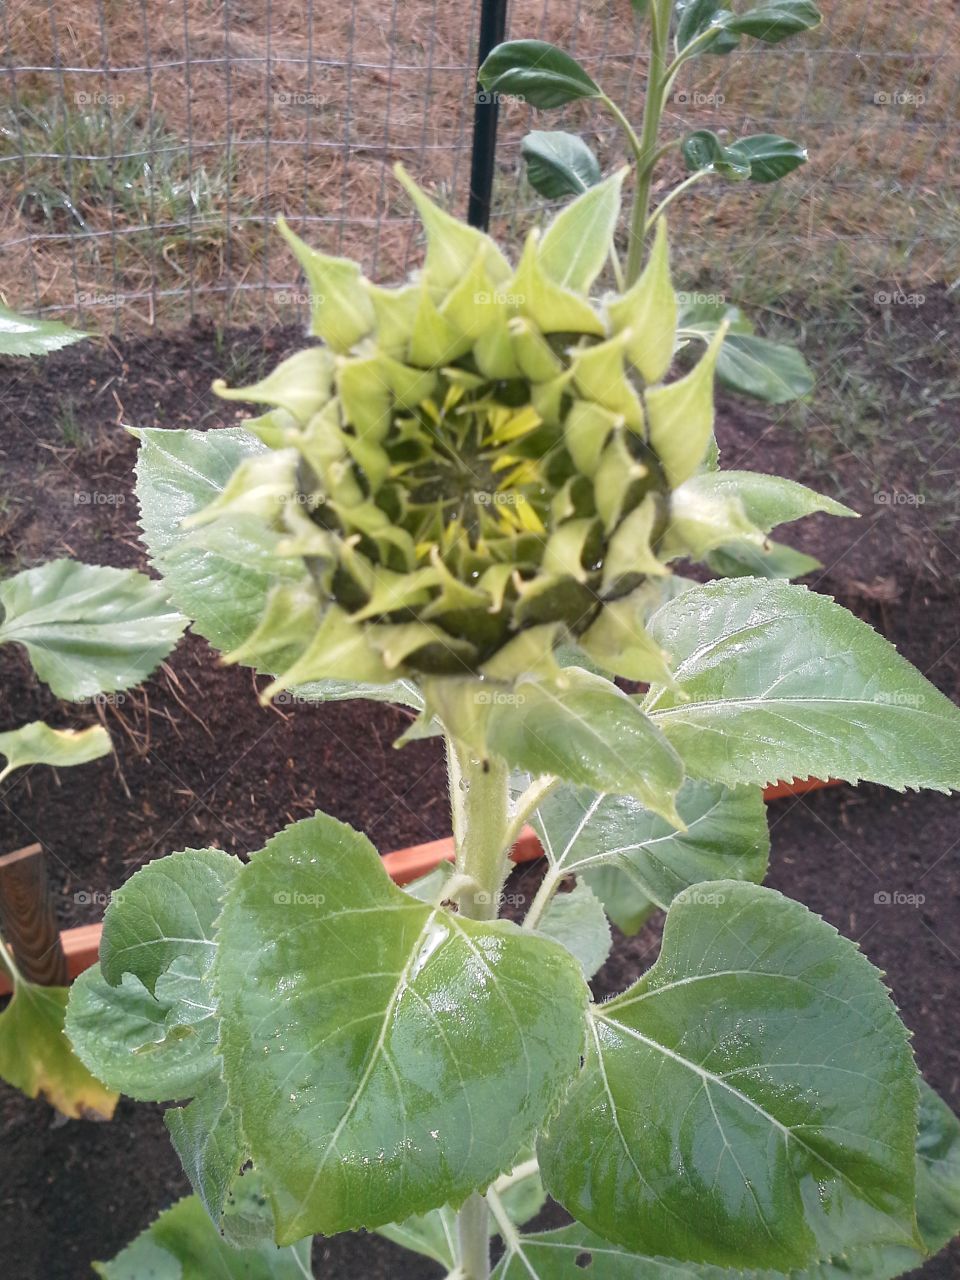 Blooming Sunflower. One of the 9 sunflowers about to bloom.